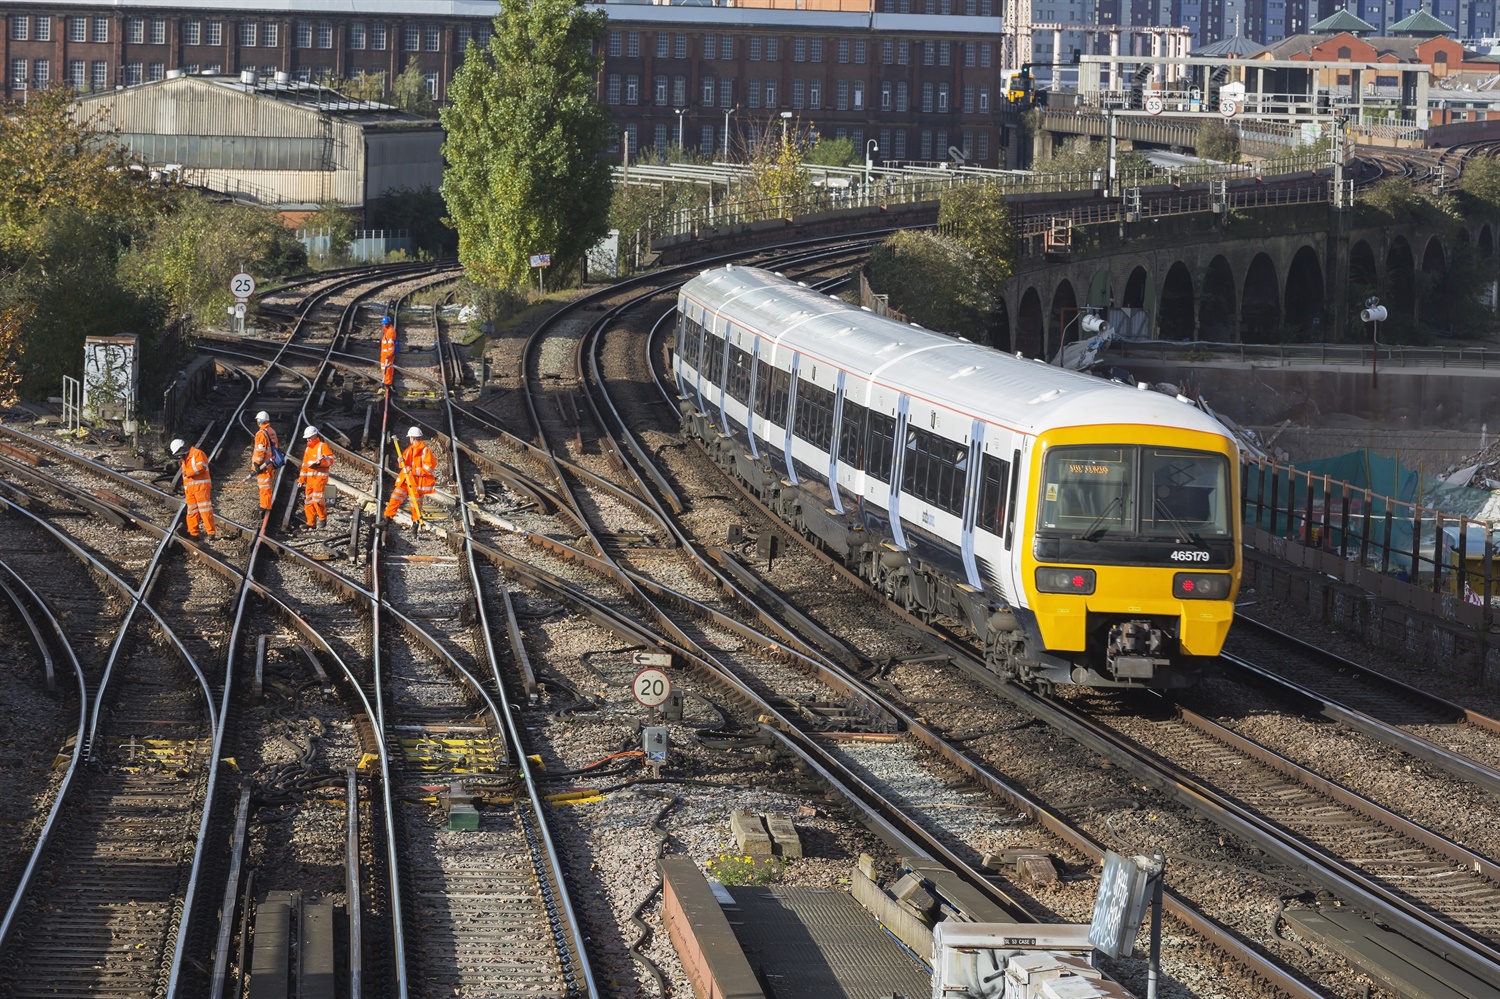 Design services framework launched by Network Rail in deal worth £650m